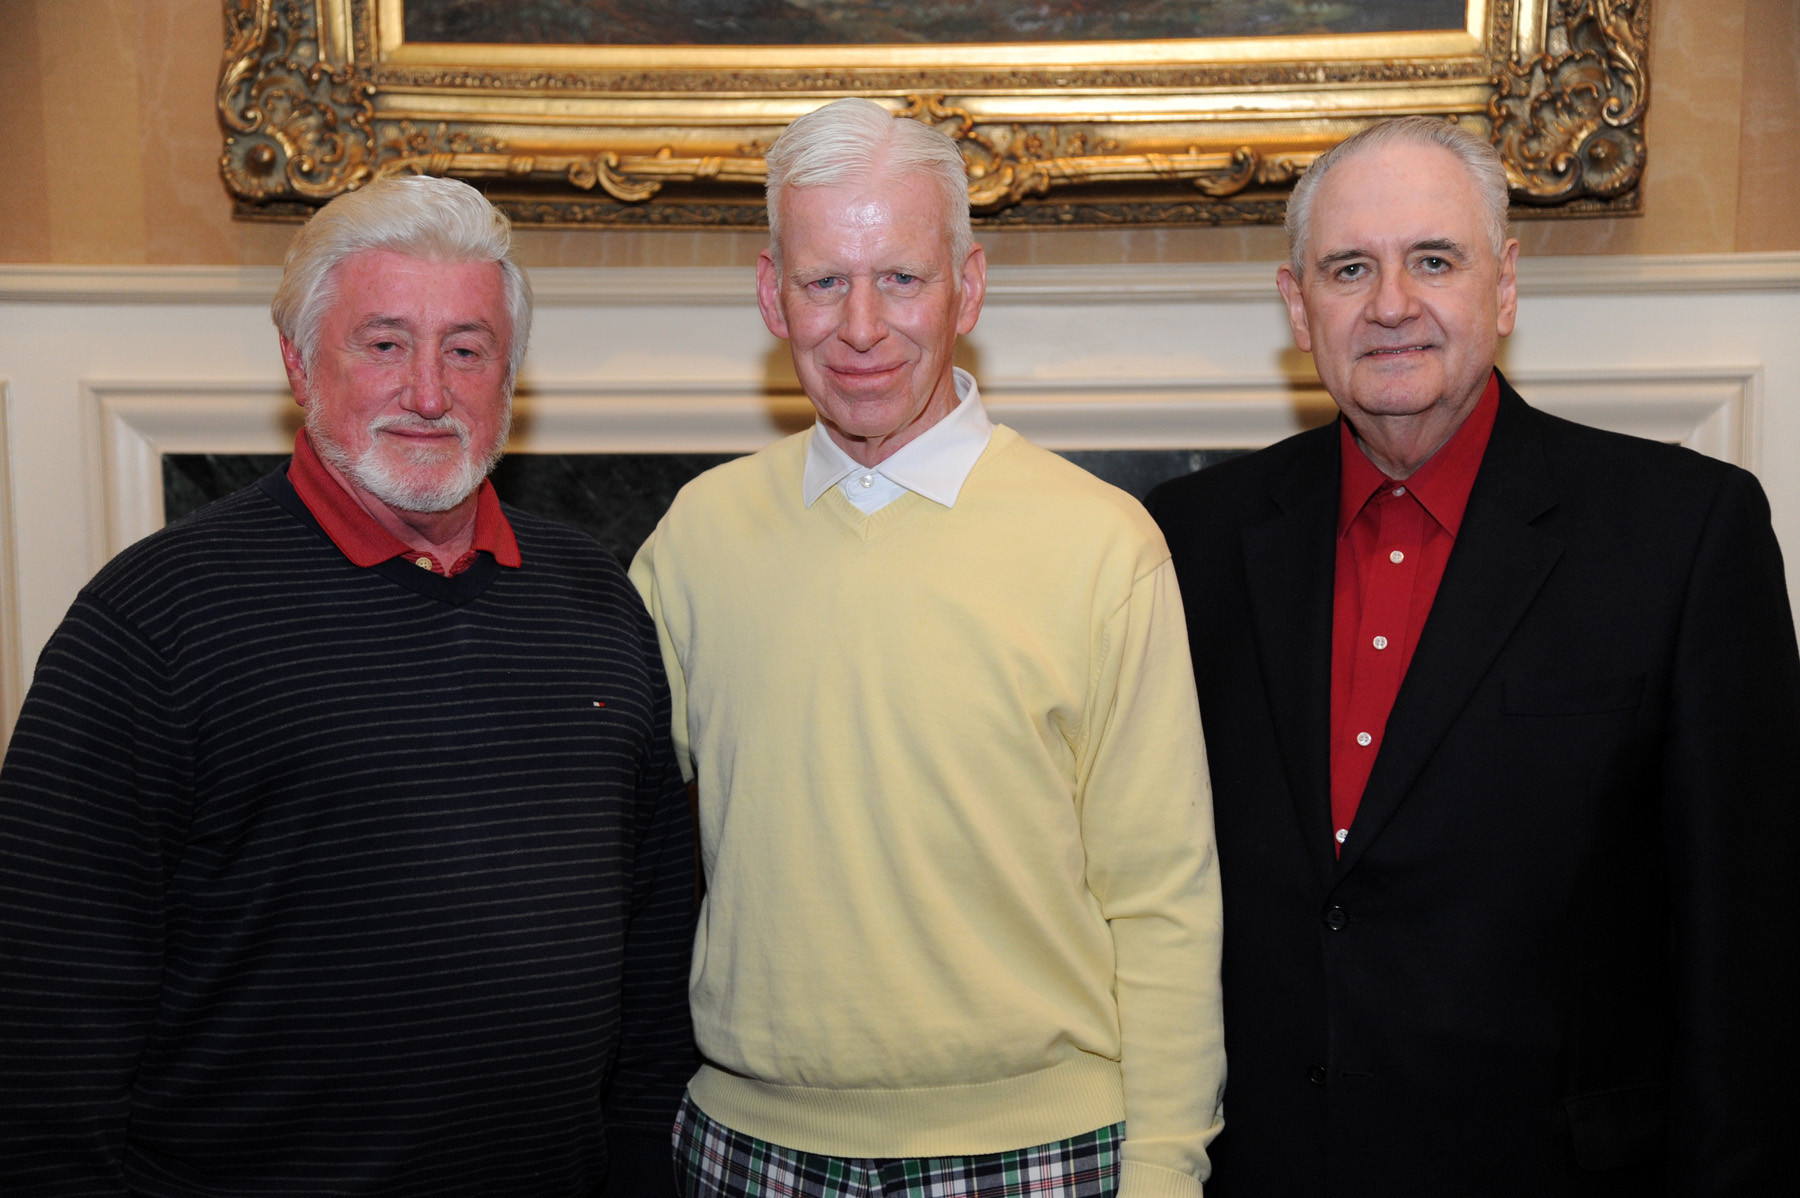 James McQuade, Peter Ledwith and Bill Gaylor were honored at the dinner.